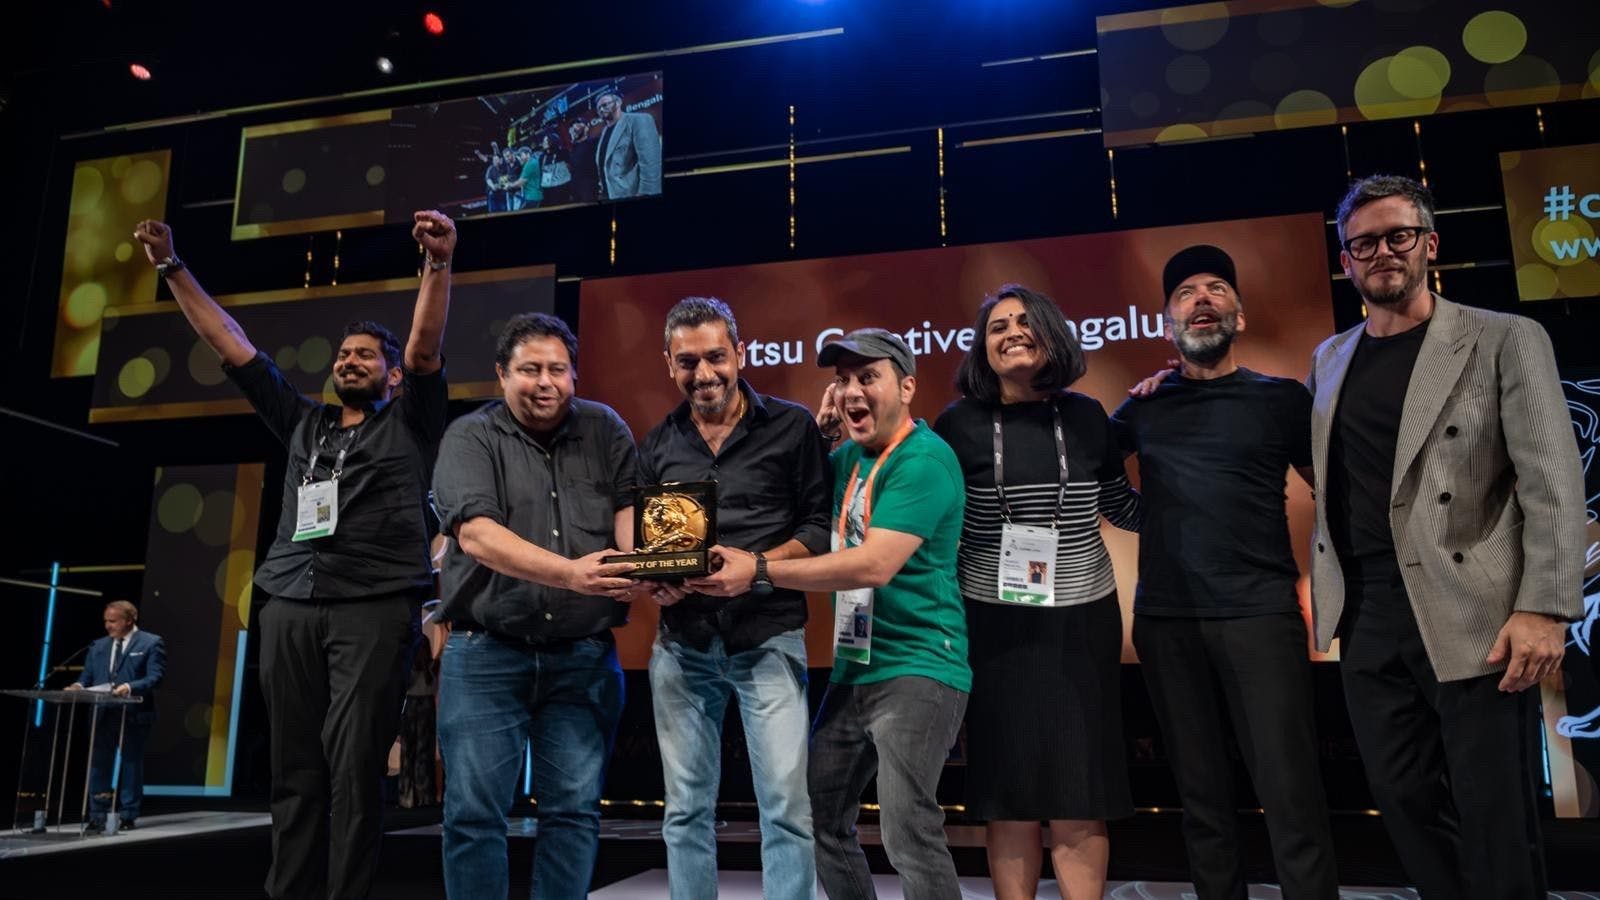 Dentsu Creative Wins Agency of the Year at Cannes Lions, 2022